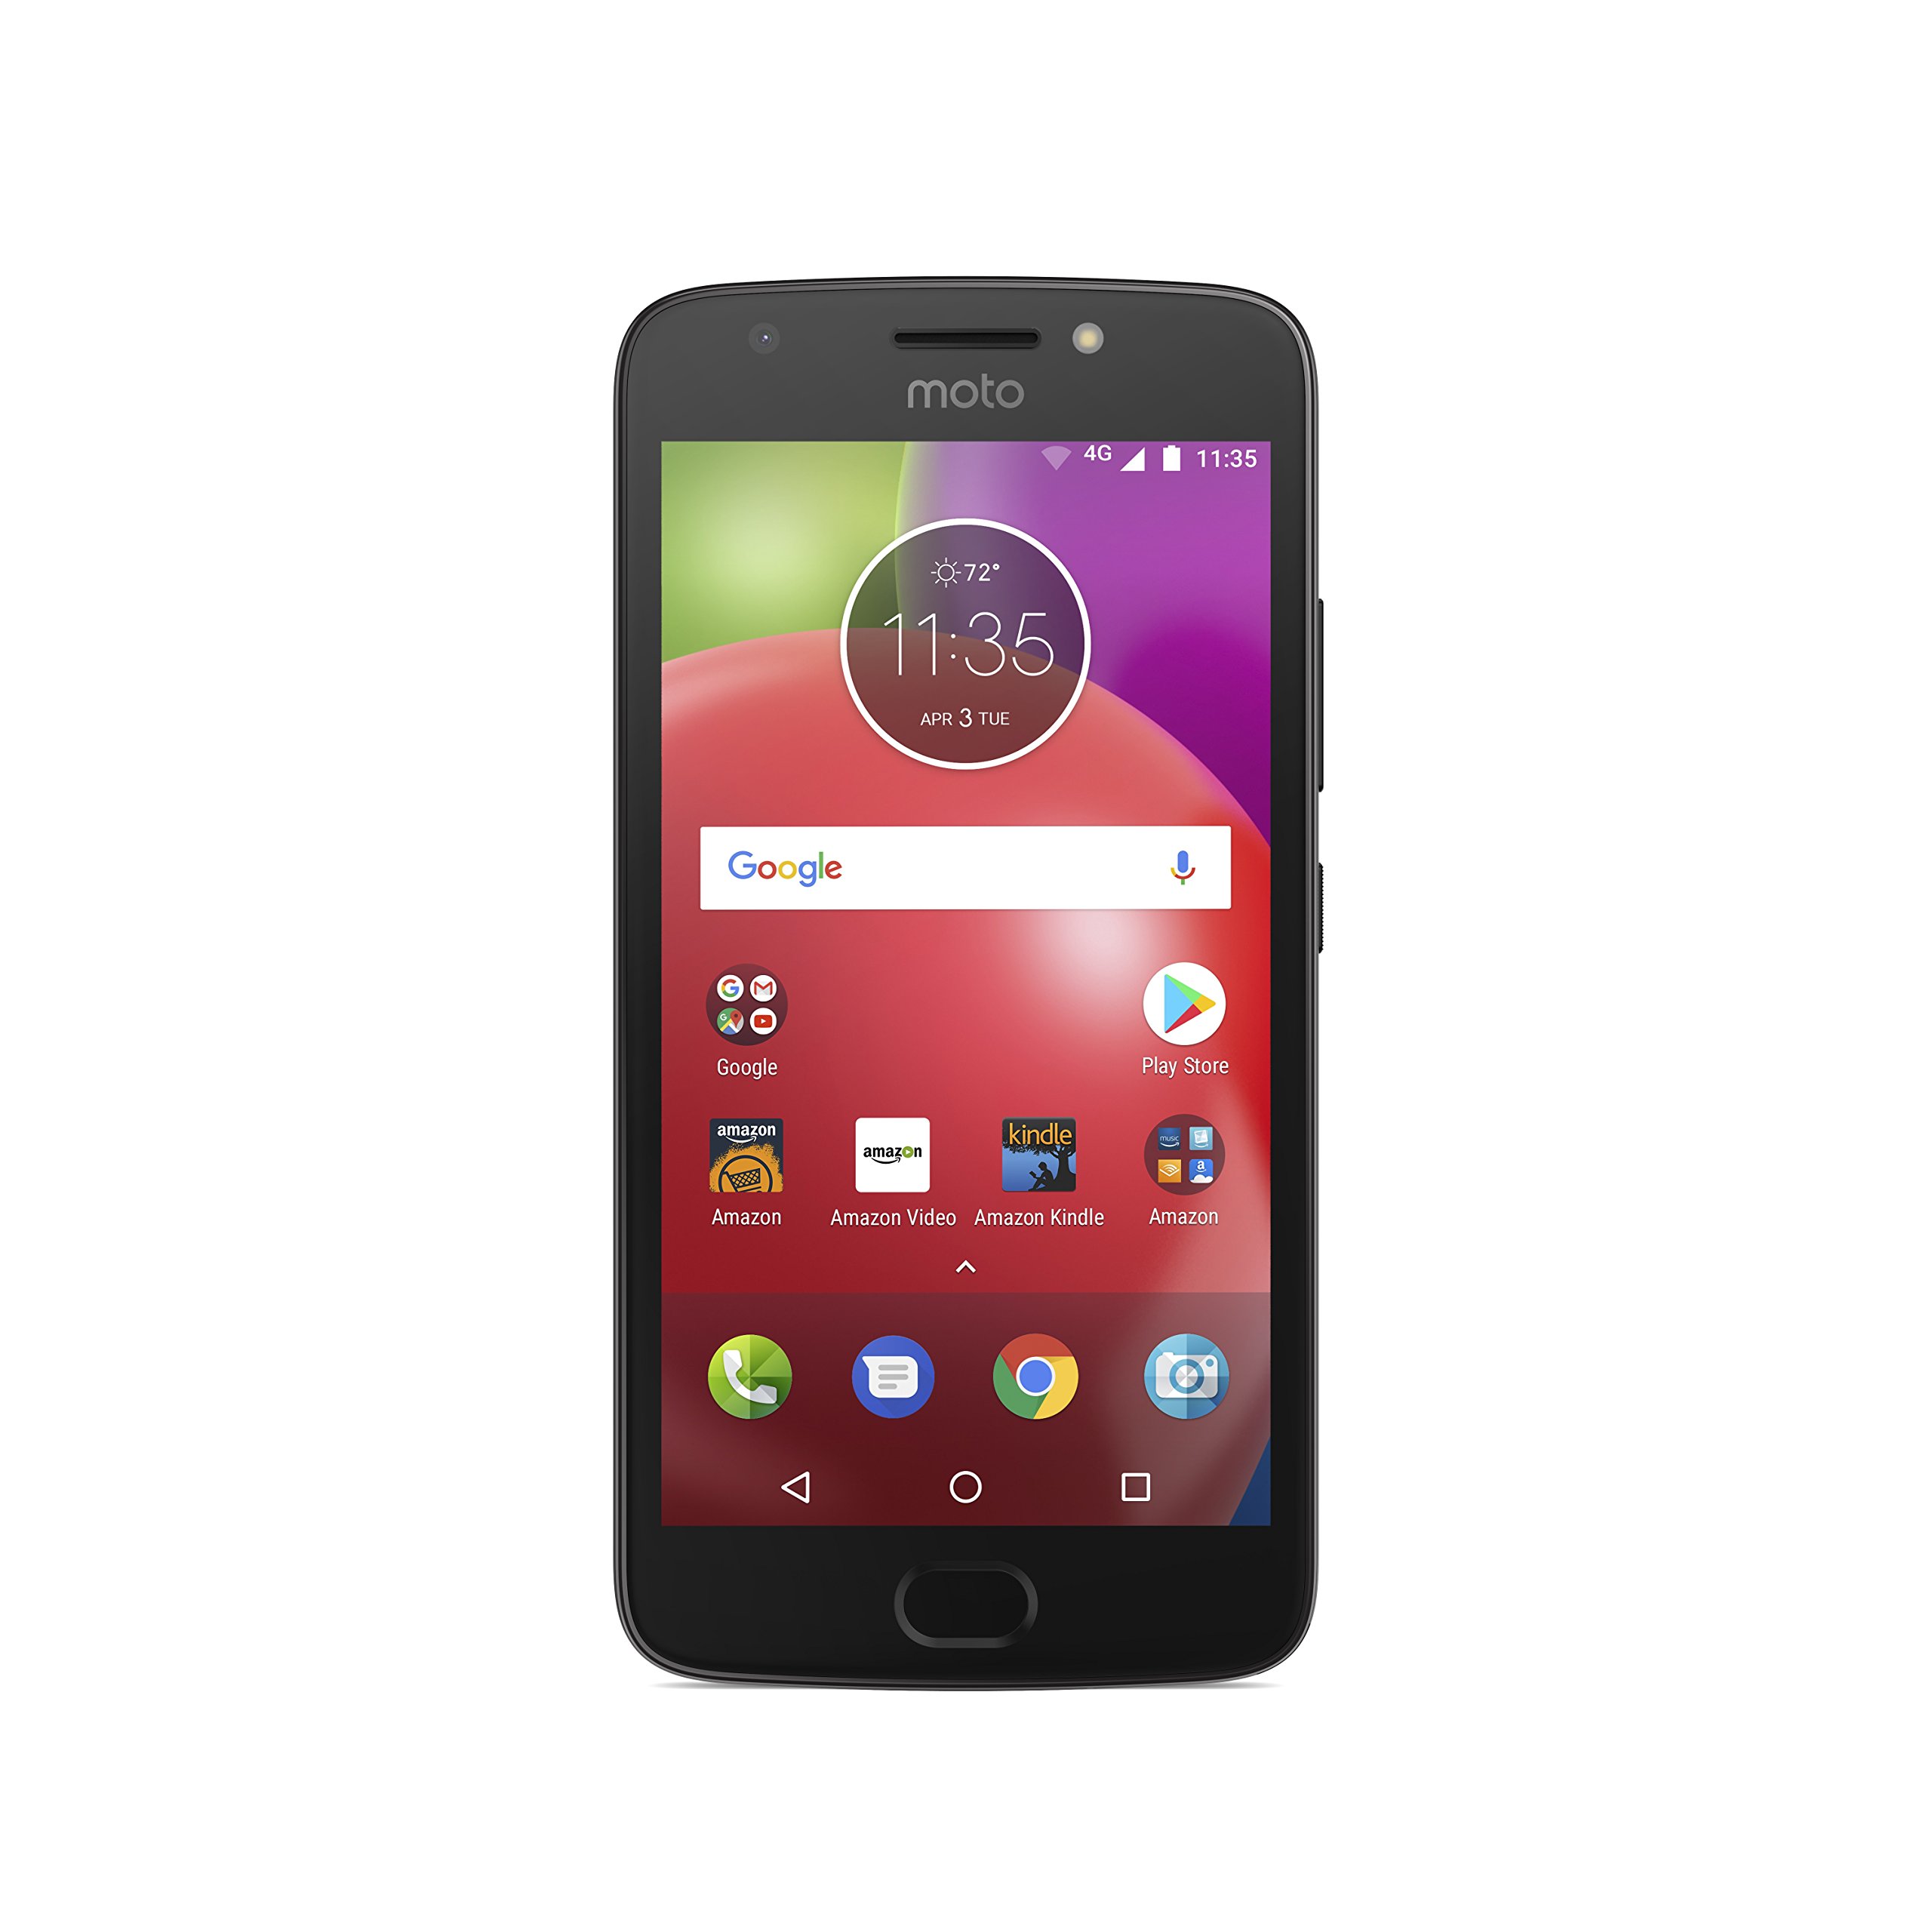 Moto E (4th Generation) - 16 GB - Unlocked (AT&T/Sprint/T-Mobile/Verizon) - Black - Prime Exclusive - with Lockscreen Offers & Ads